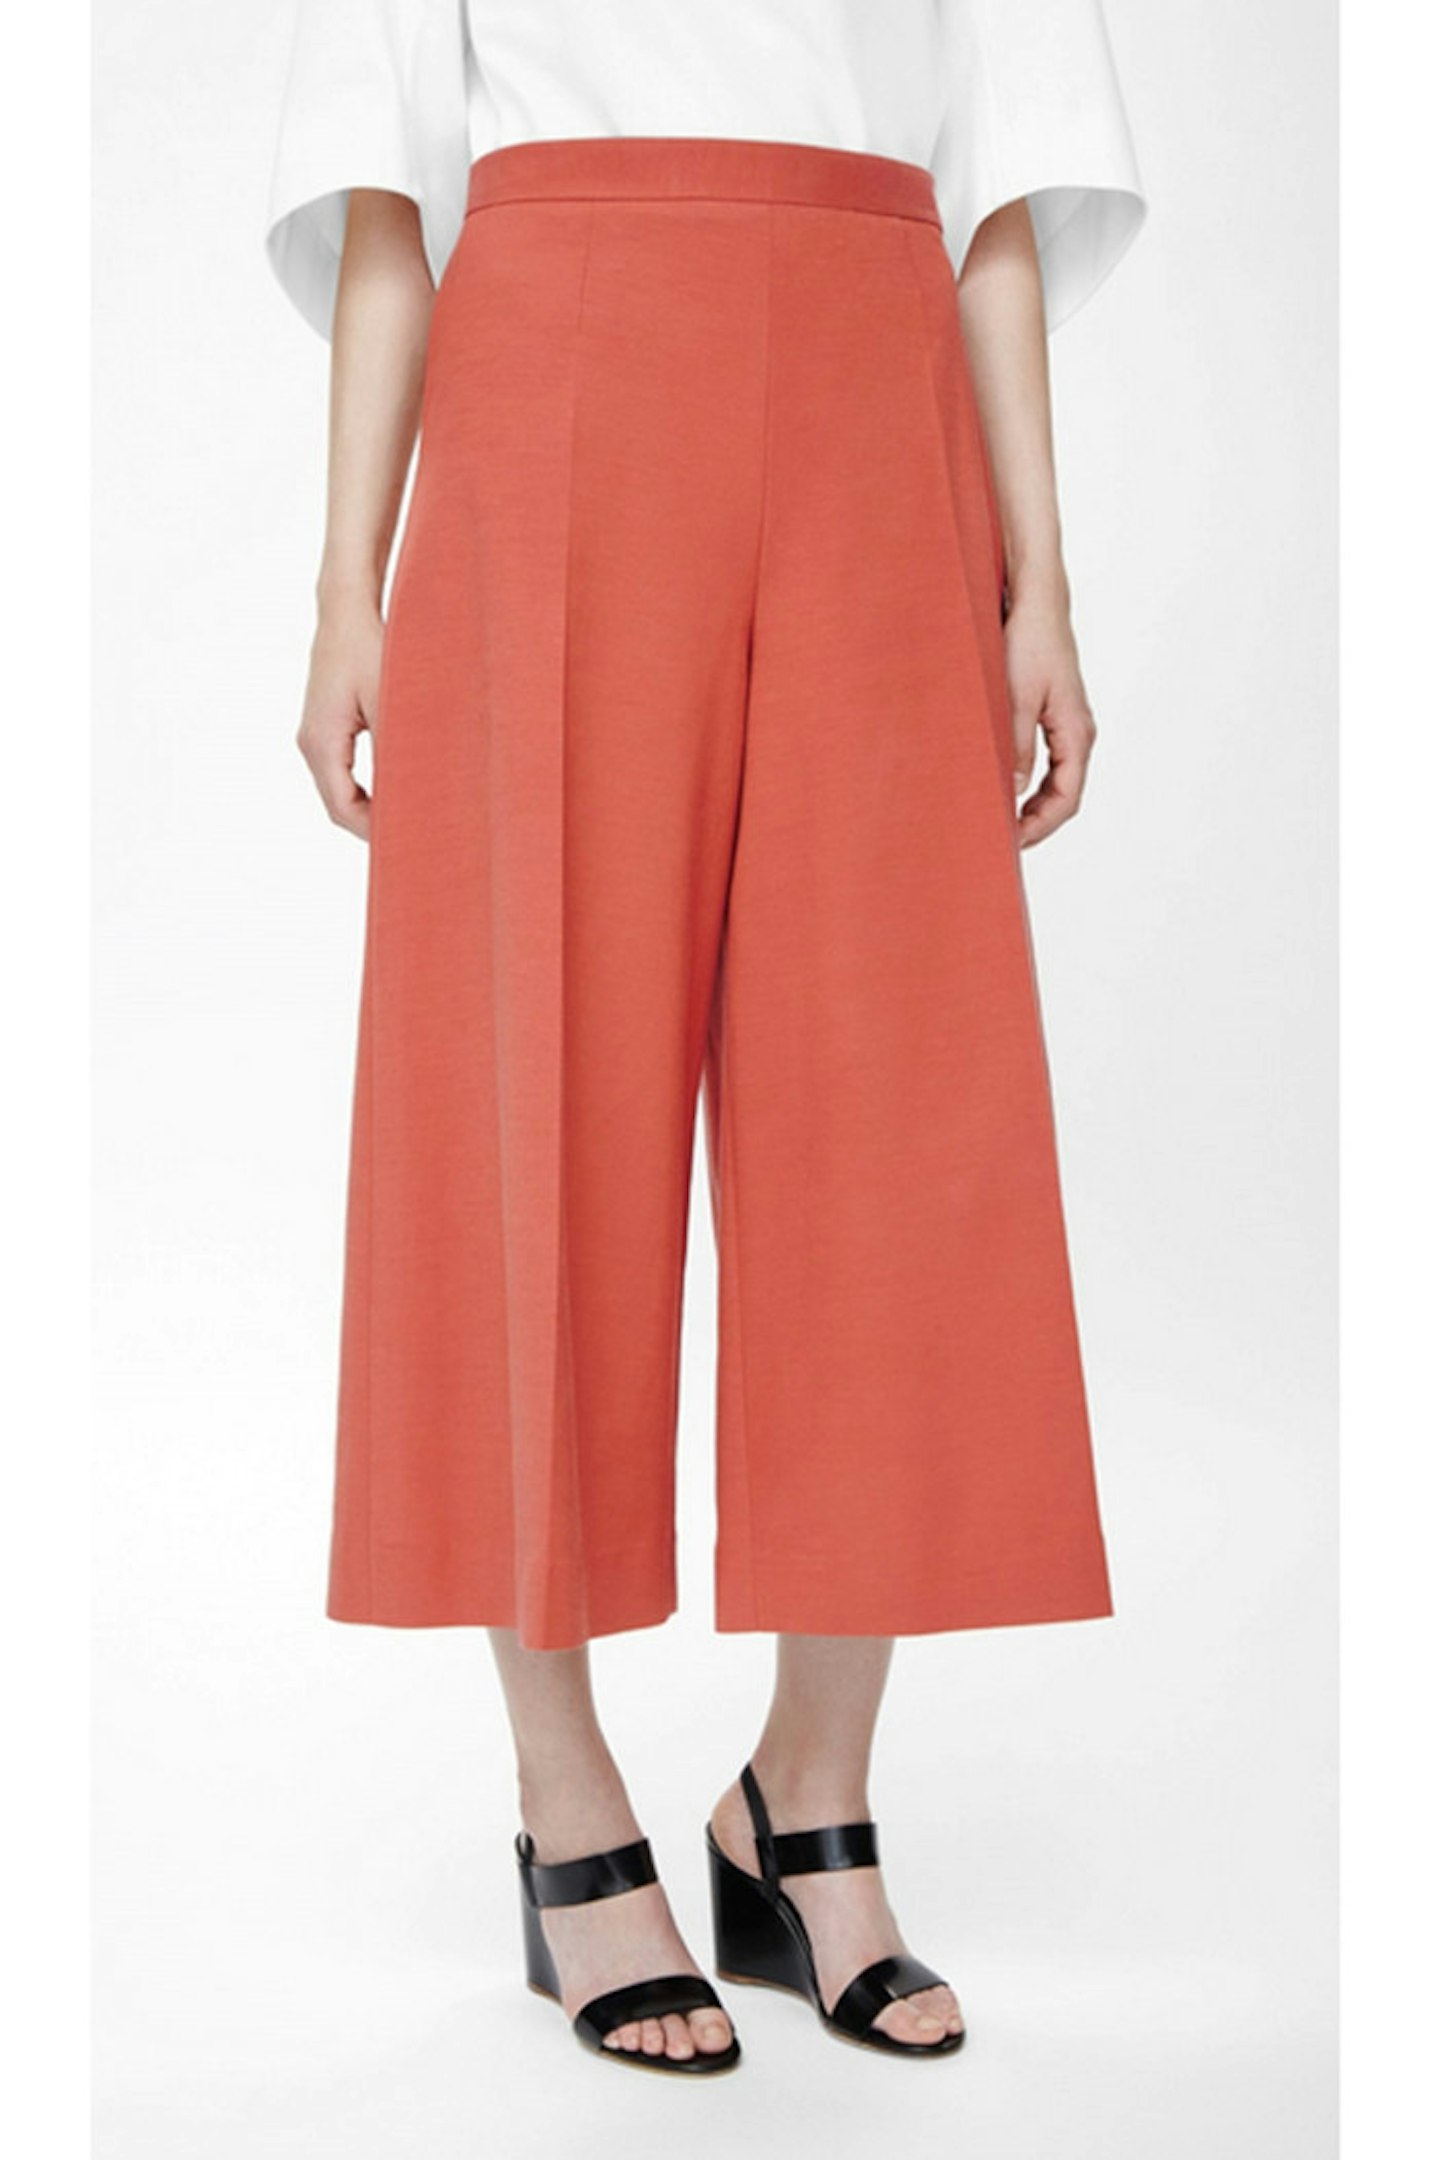 If your work environment has a strict dress code, sometimes dressing for the summer months can be tricky. Tailored culottes are a way to show your fashion flair without breaking the rules.